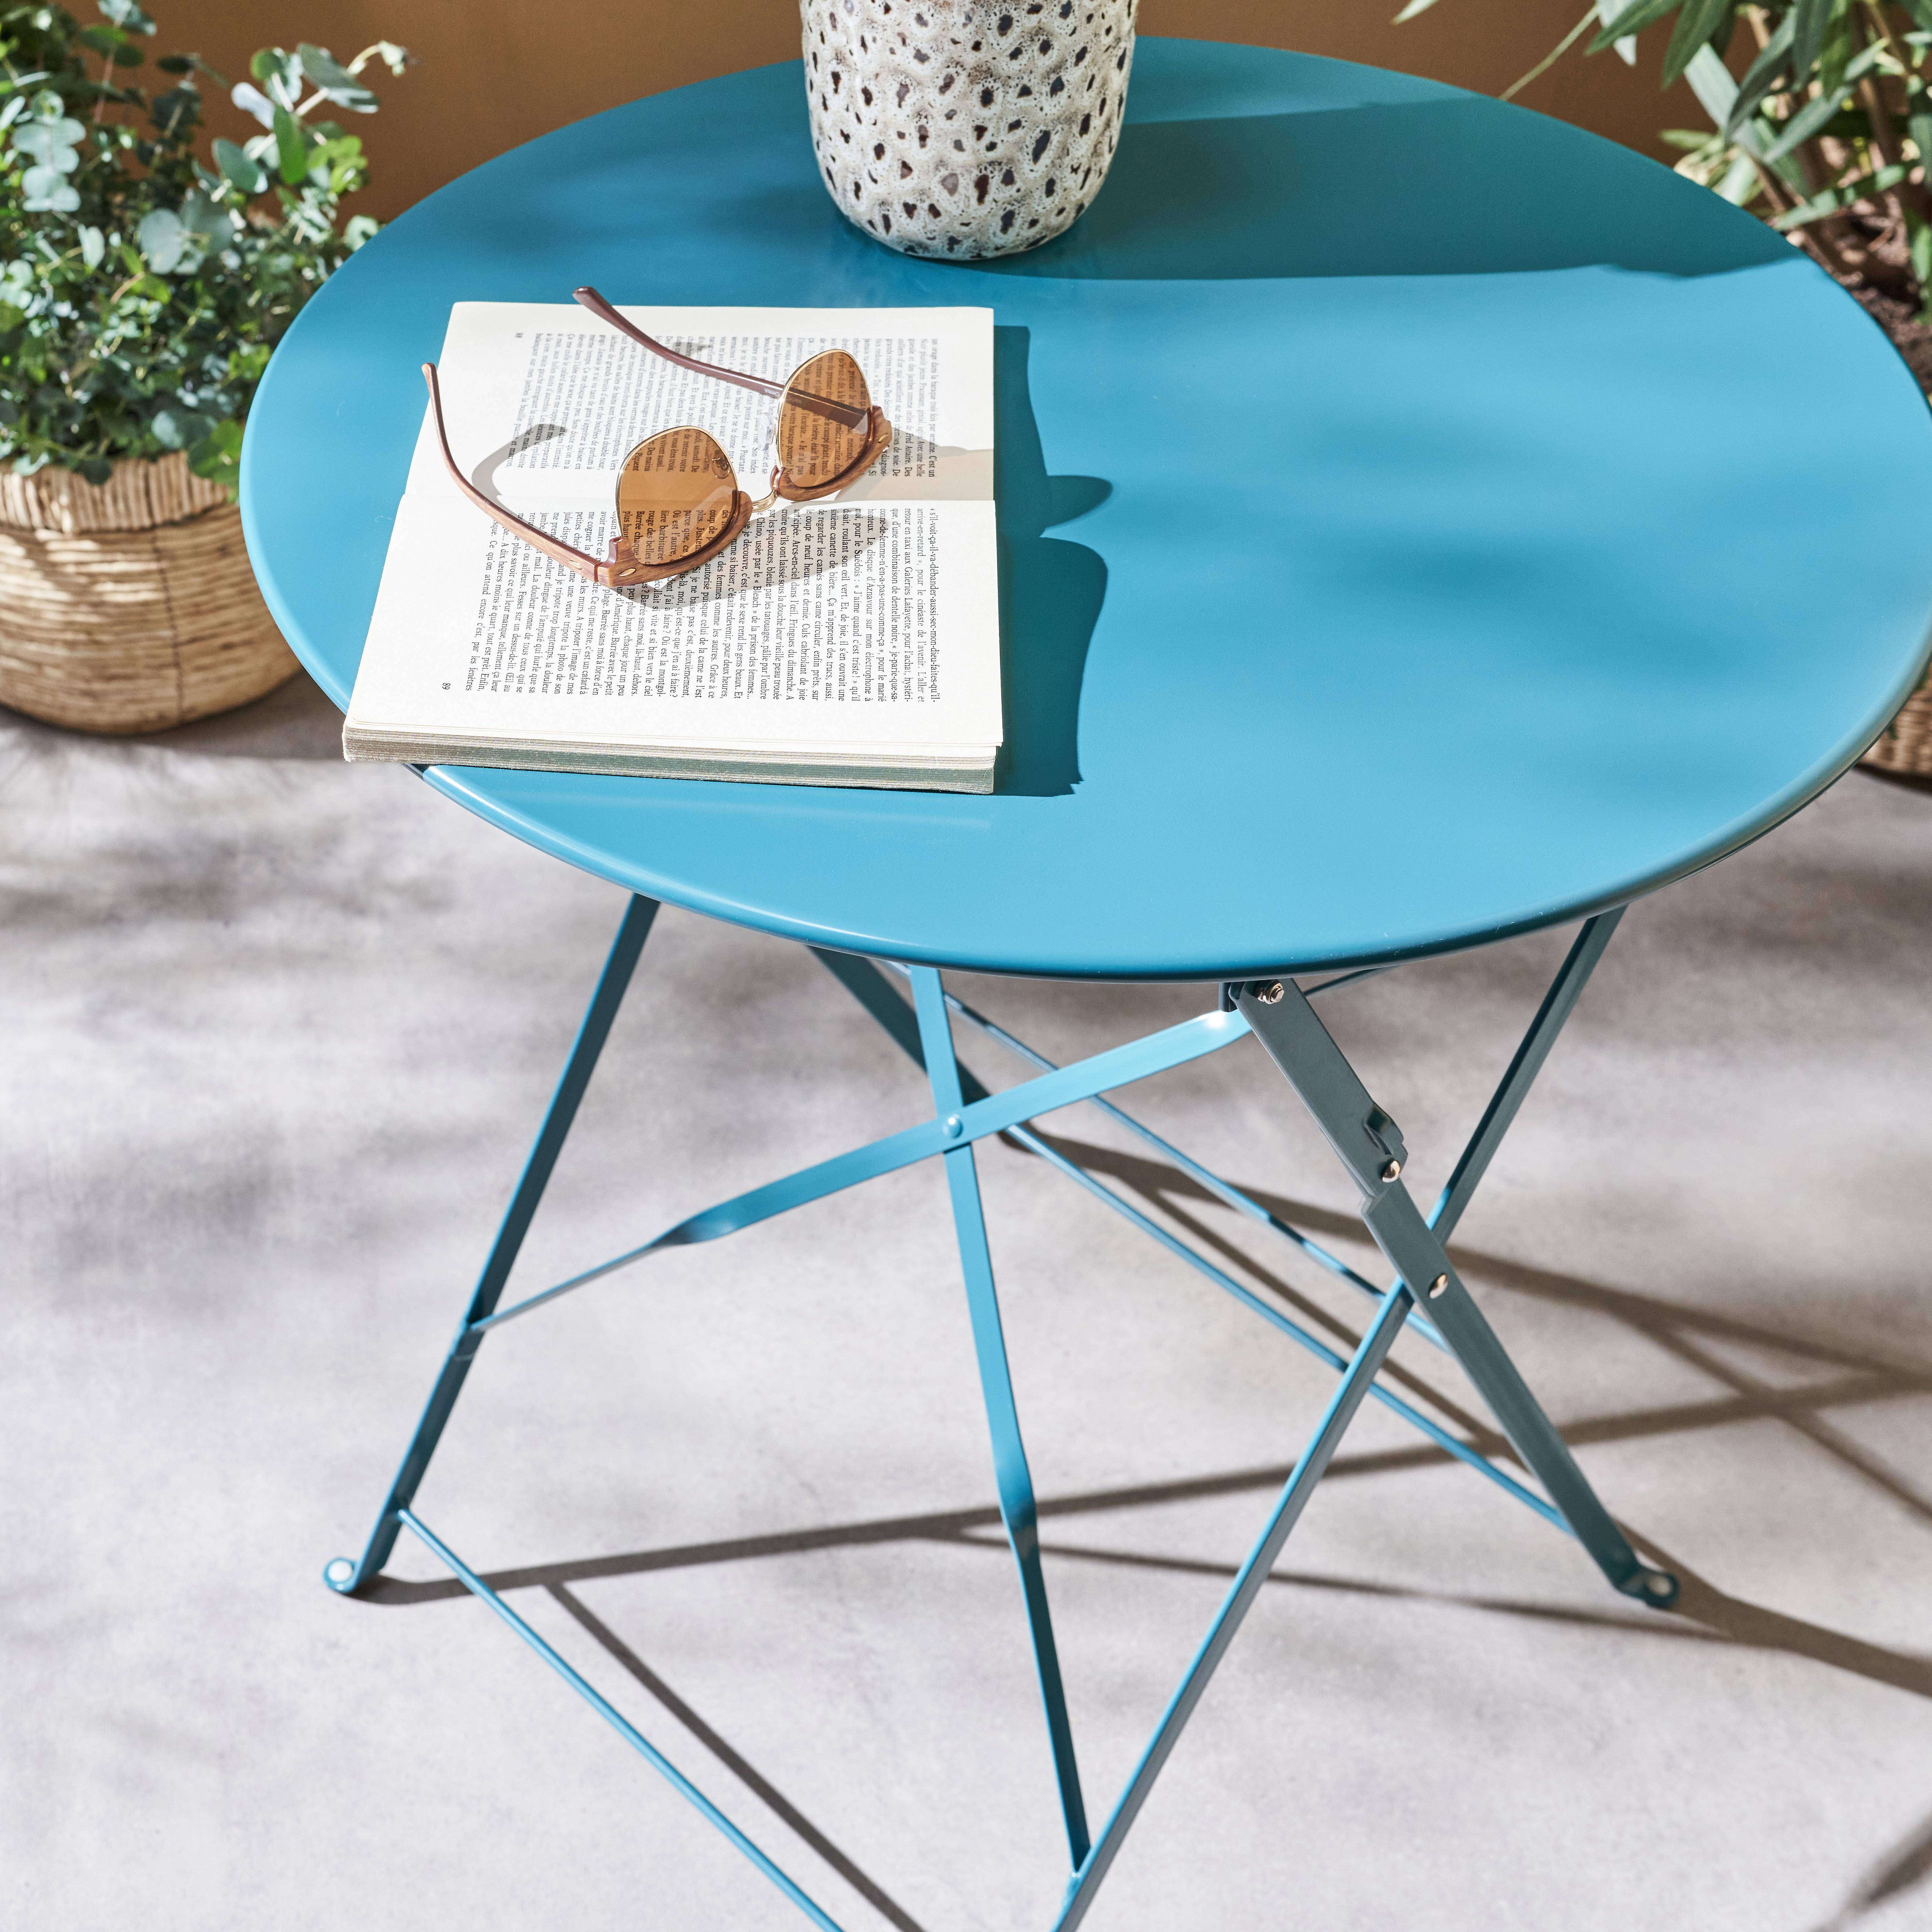 Foldable bistro garden table - Round Emilia duck blue - Round table Ø60cm, thermo-lacquered steel,sweeek,Photo2